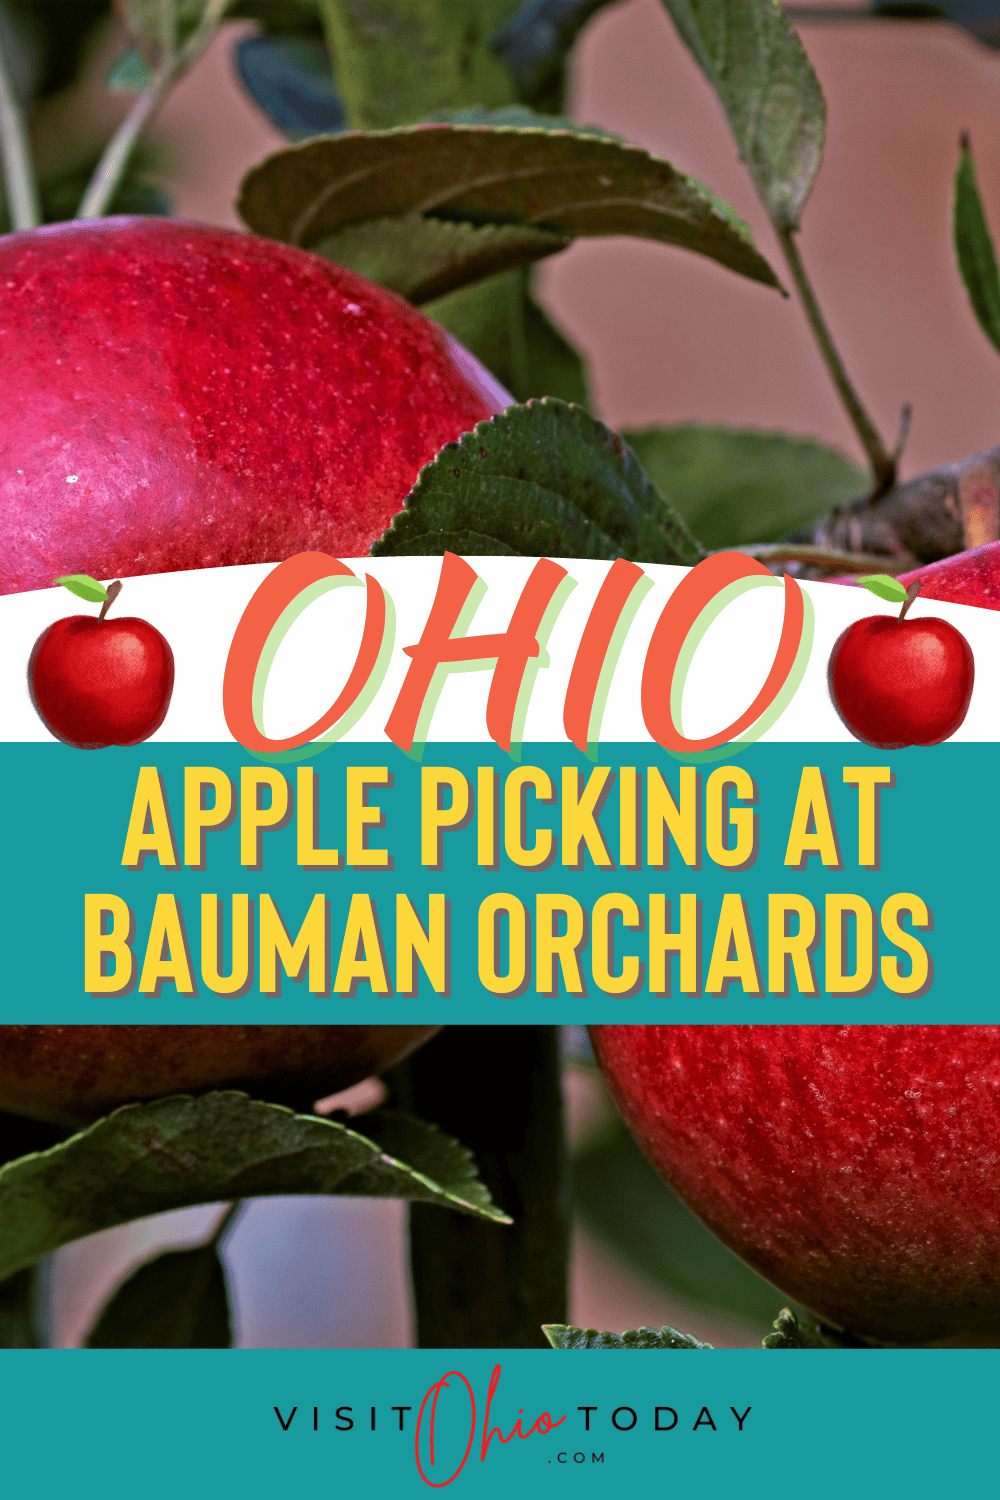 Close up photo of red apples. Text overlay says ohio apple picking at bauman orchards